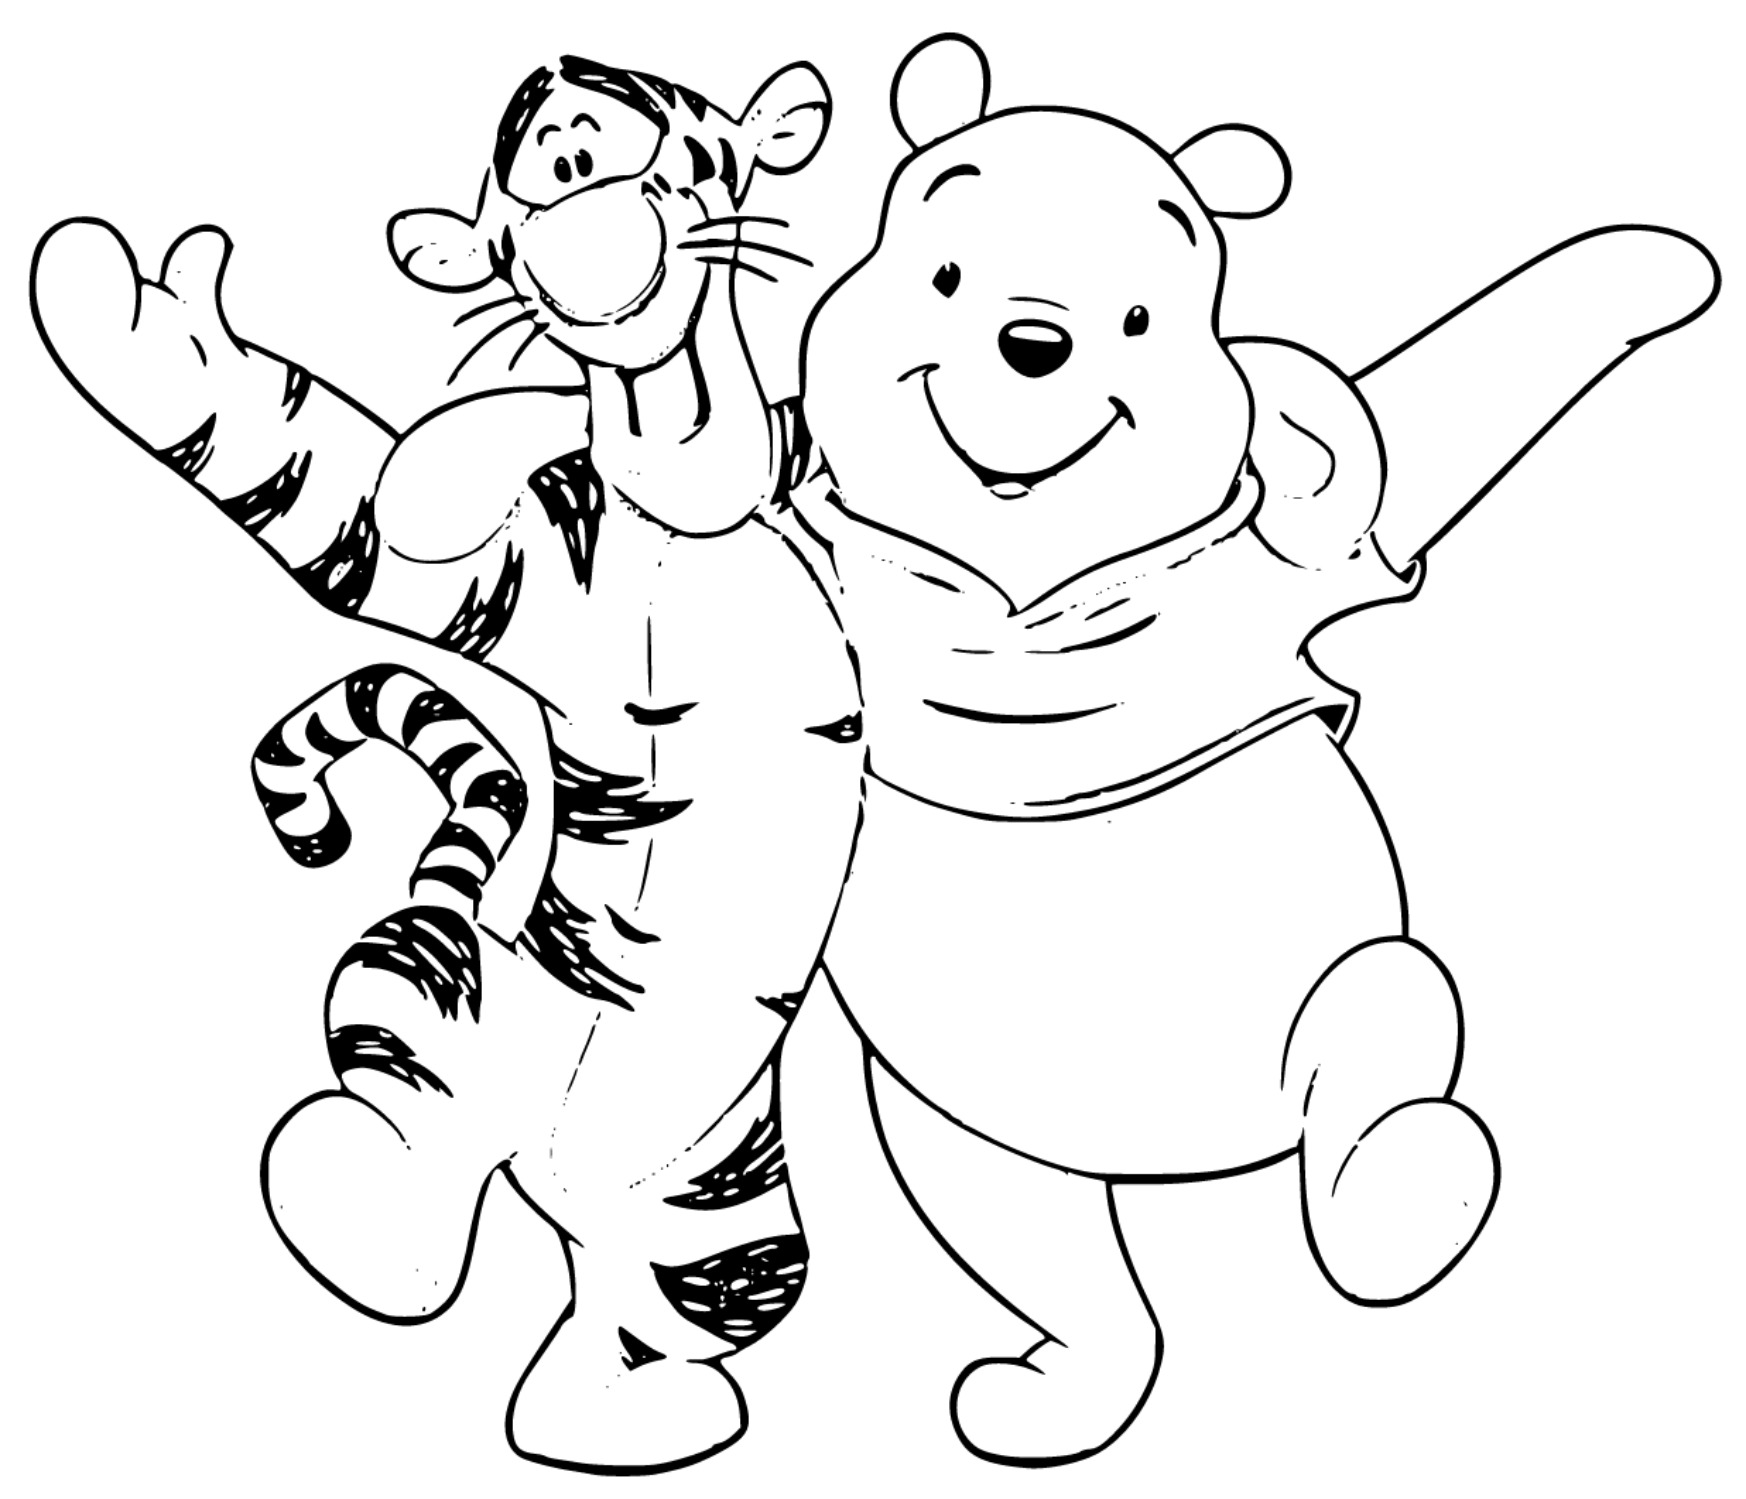 Printable Tigger and Winnie the Pooh Coloring Page for kids.